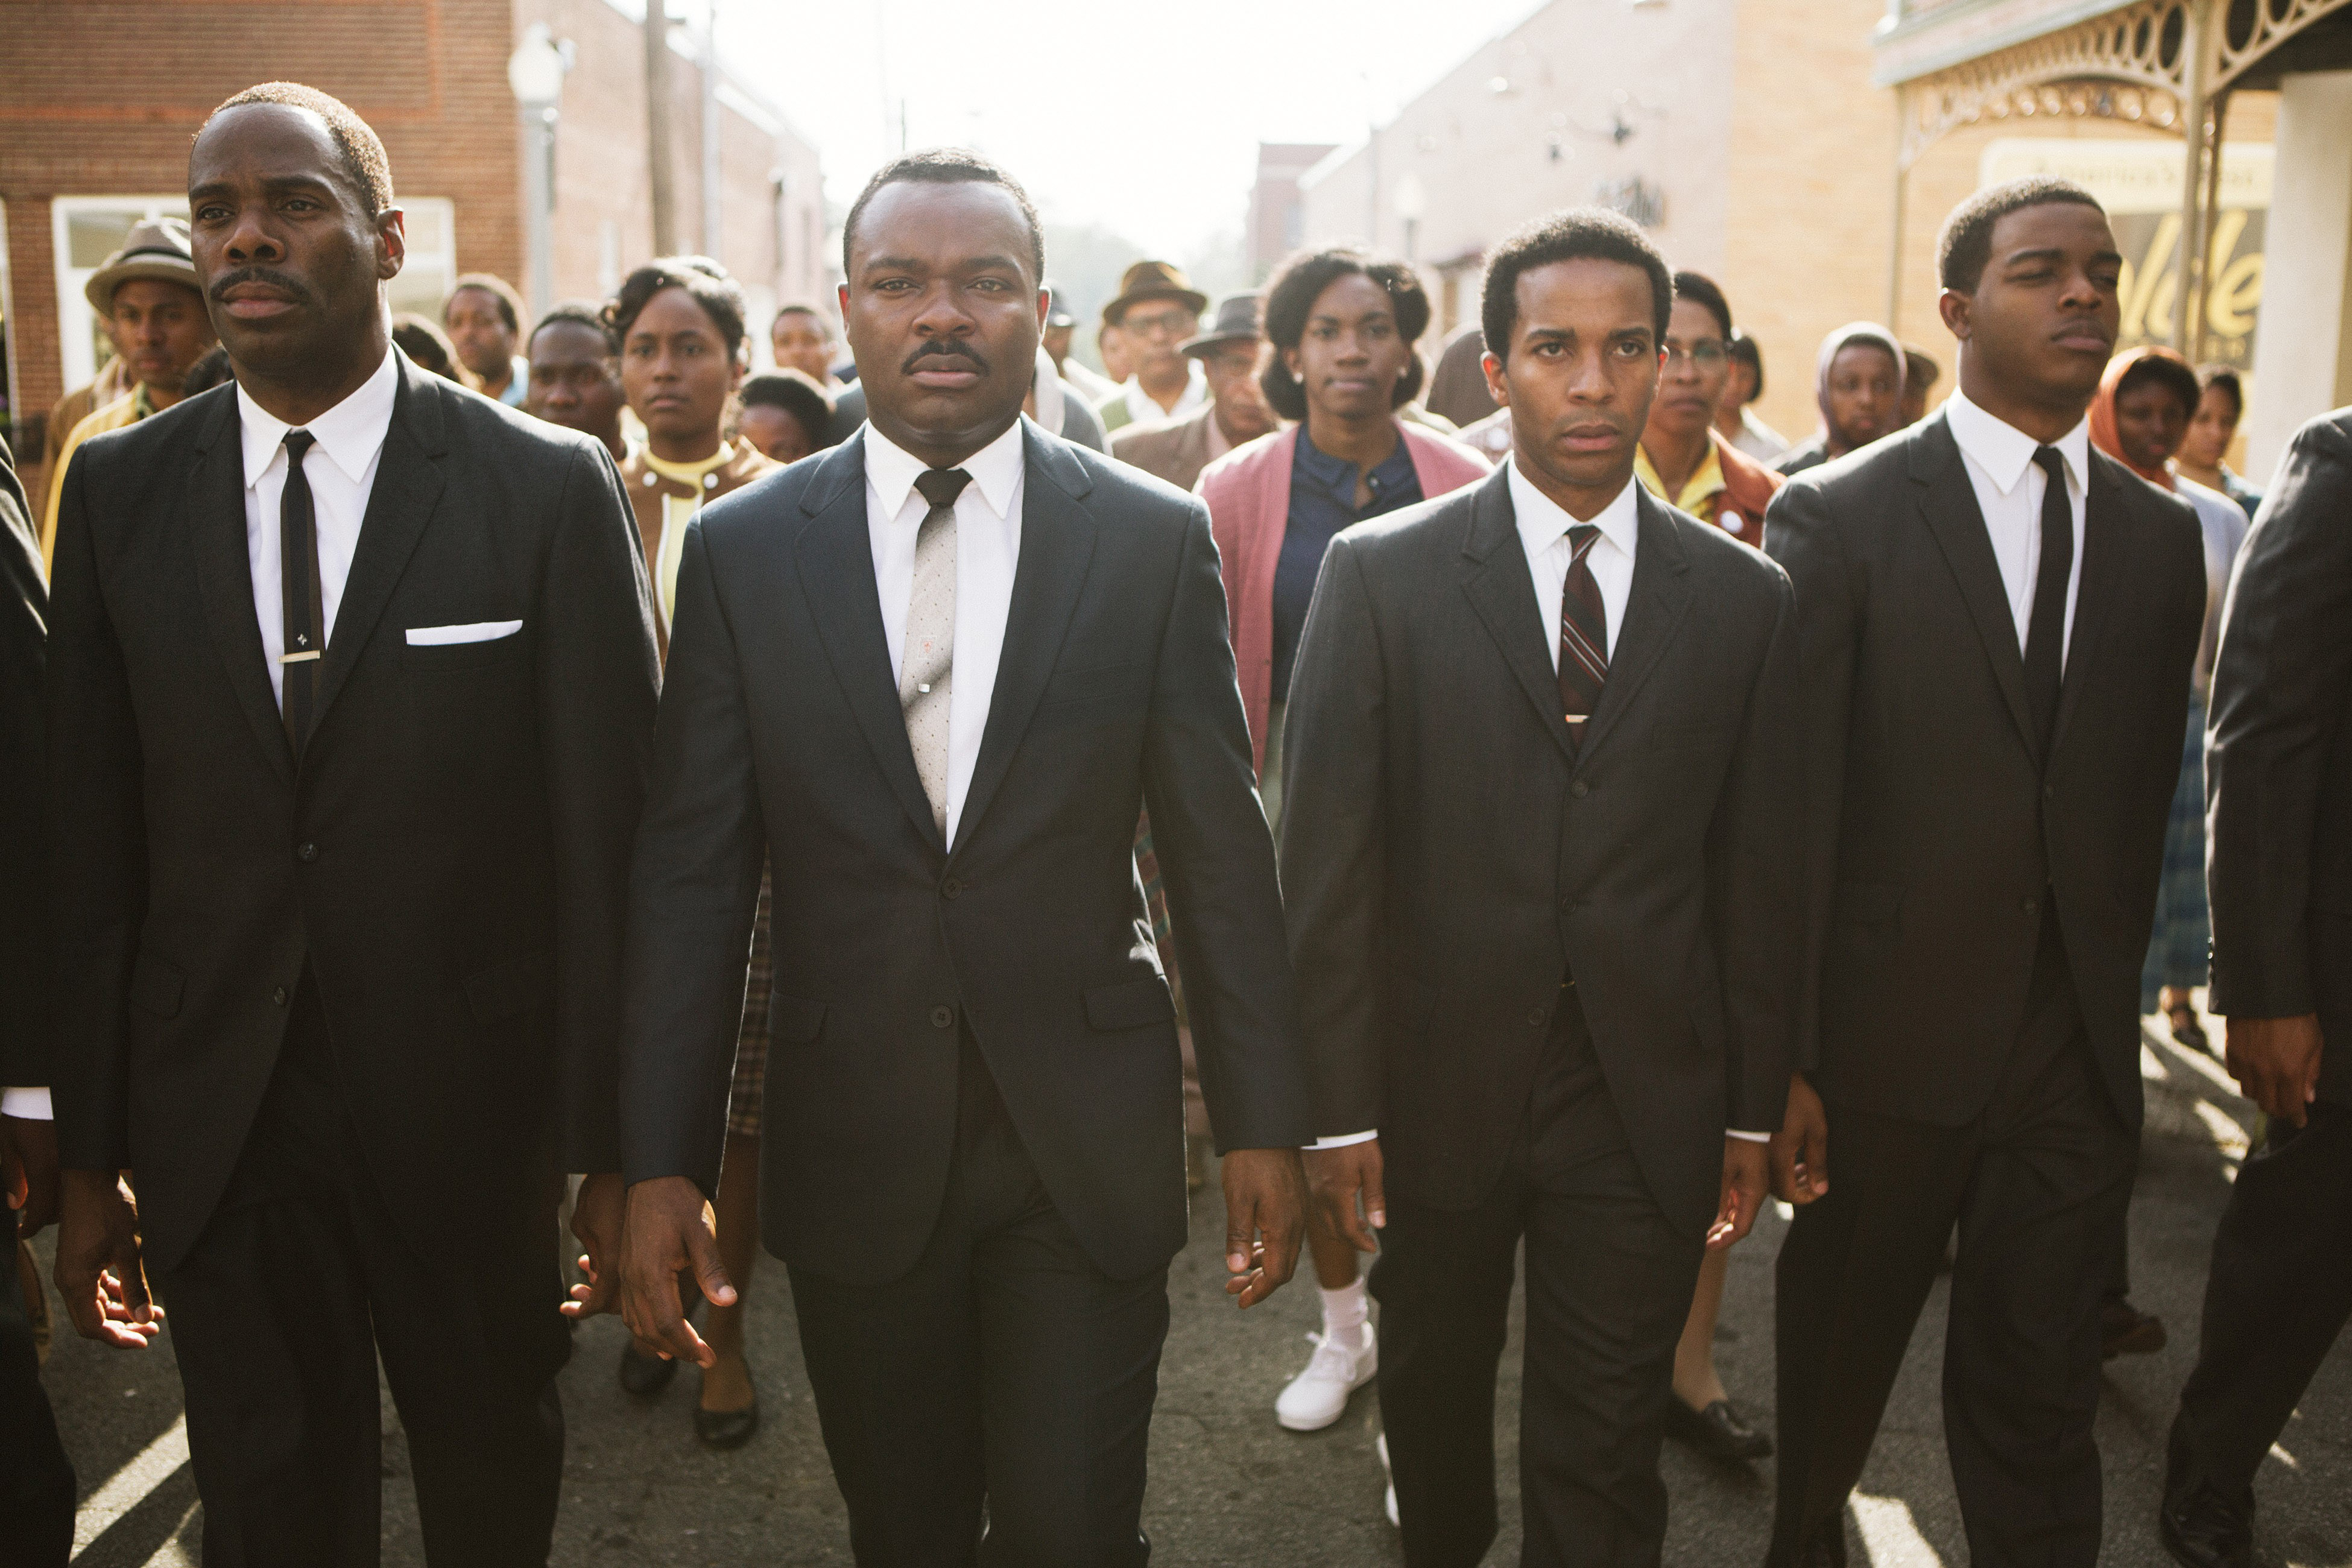 From left: Colman Domingo, David Oyelowo (as Martin Luther King, Jr.), Andre Holland and Stephan James in a scene from <i>Selma</i>. (Atsushi Nishijima—Paramount Pictures/Courtesy Everett Collection)